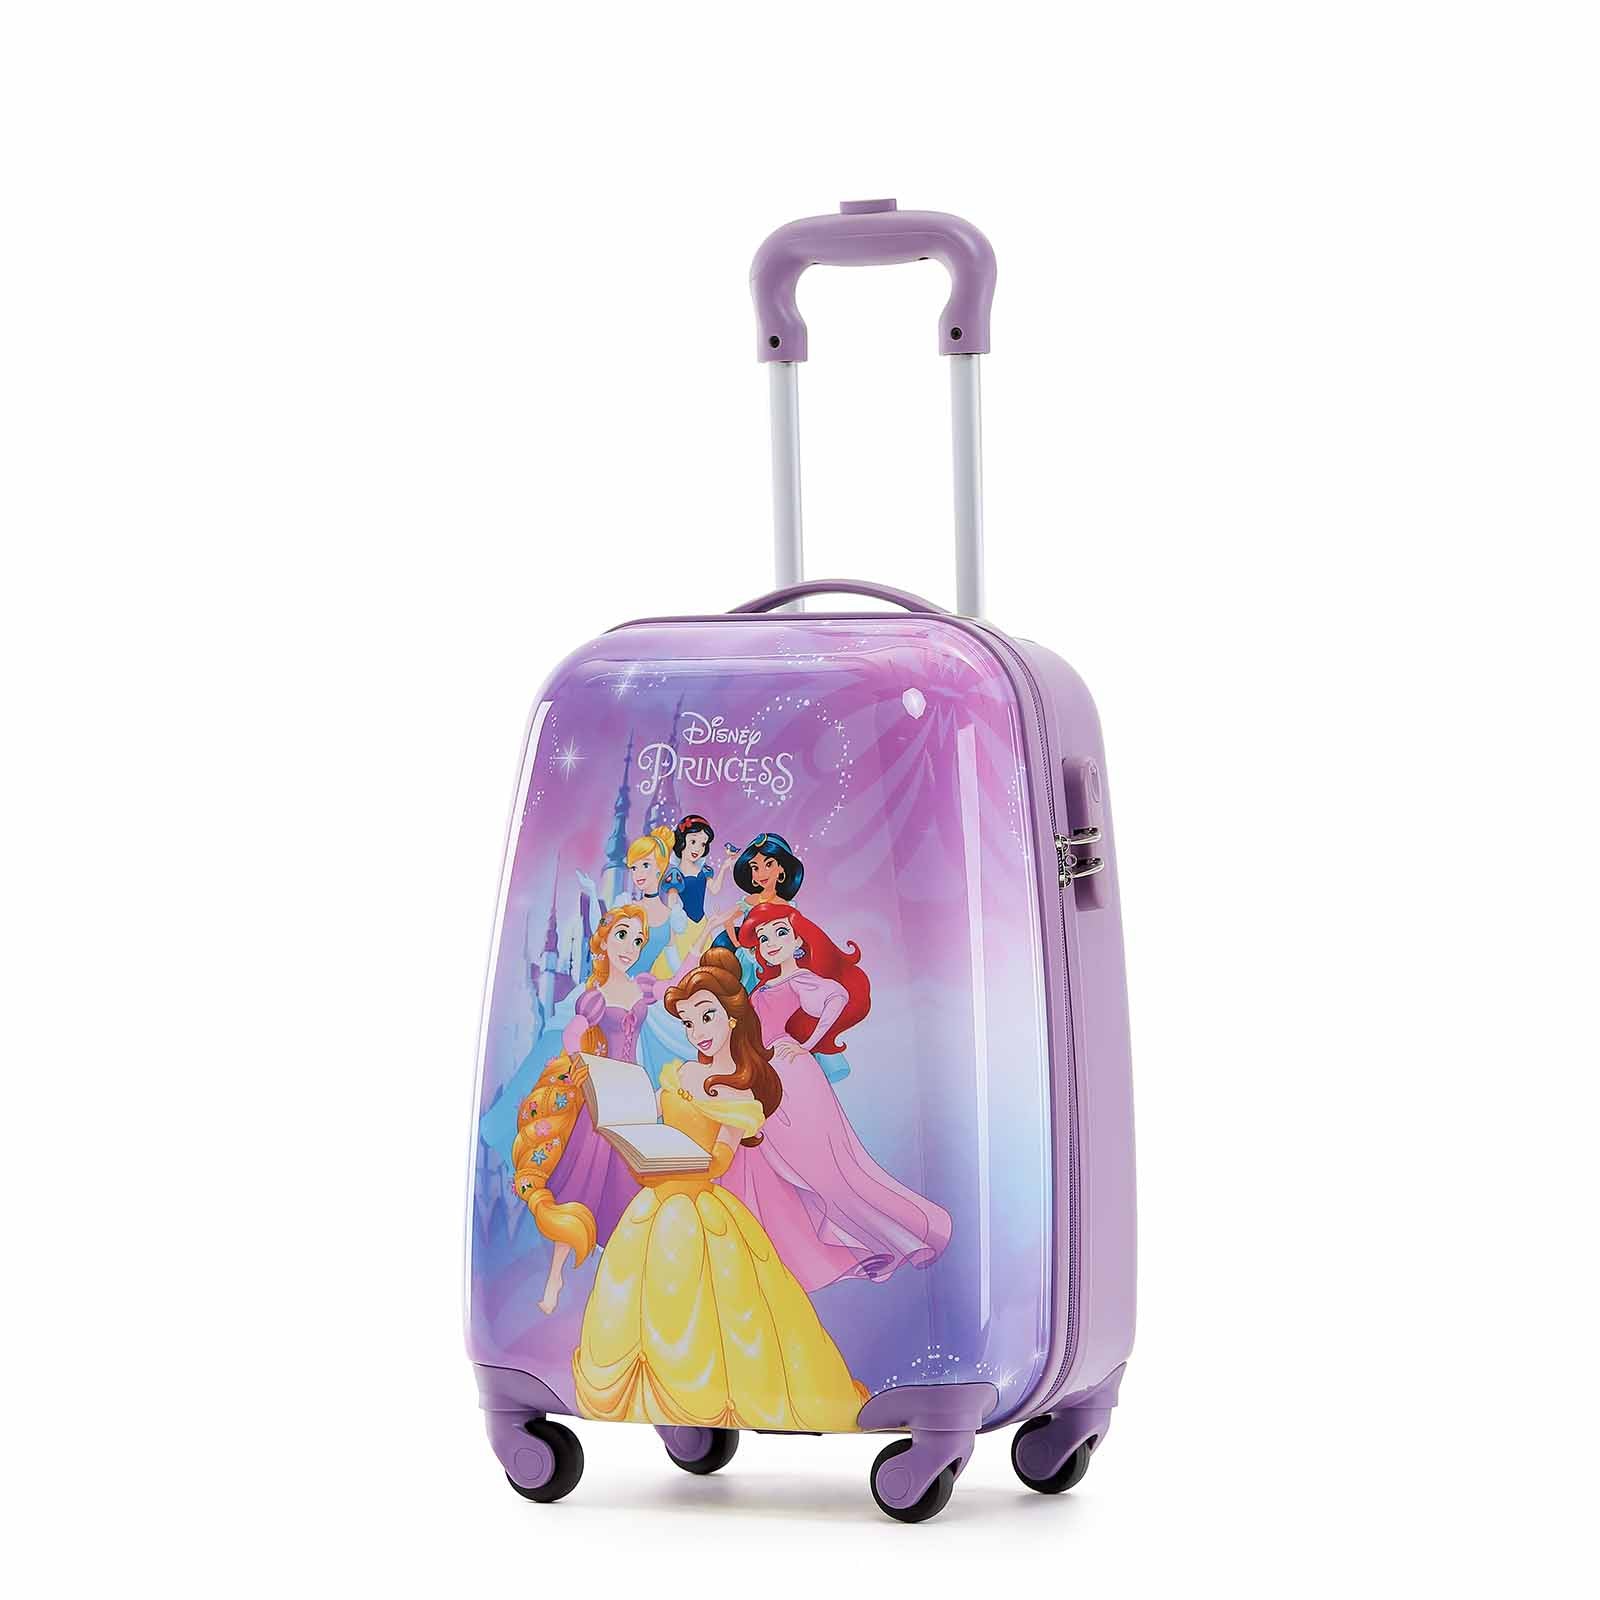 Disney Princess 17 Inch Carry-On Suitcase